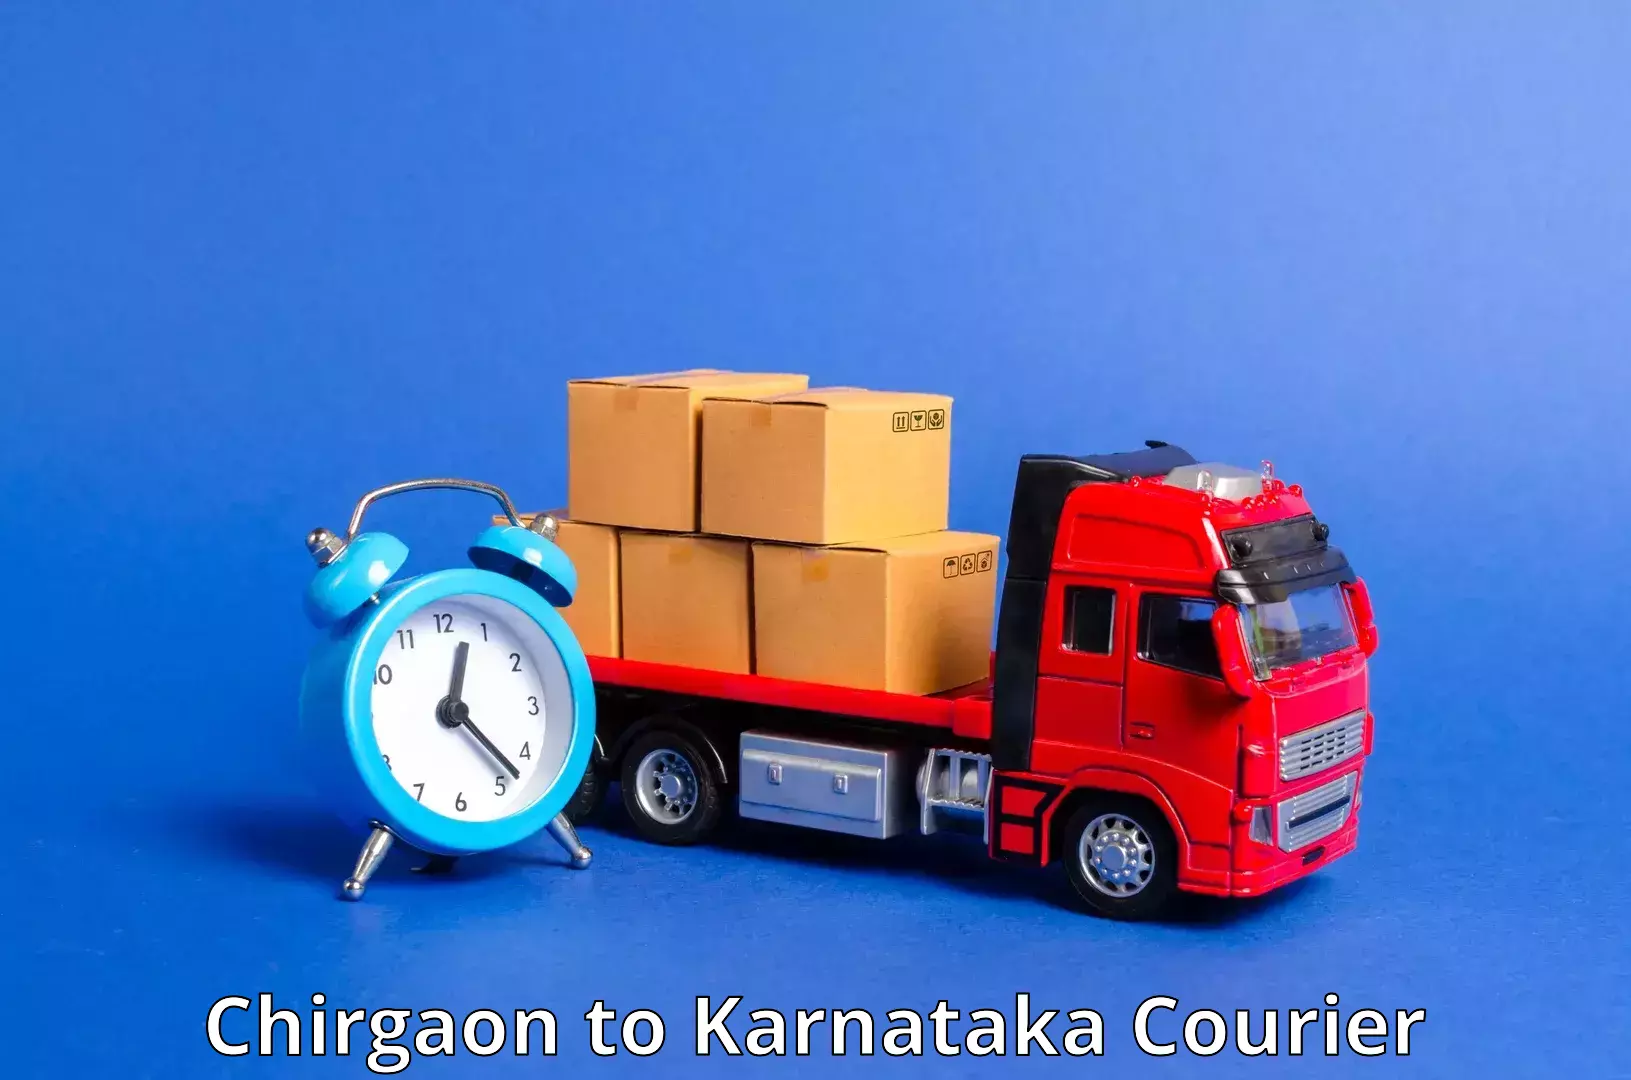 Sustainable delivery practices Chirgaon to Karnataka